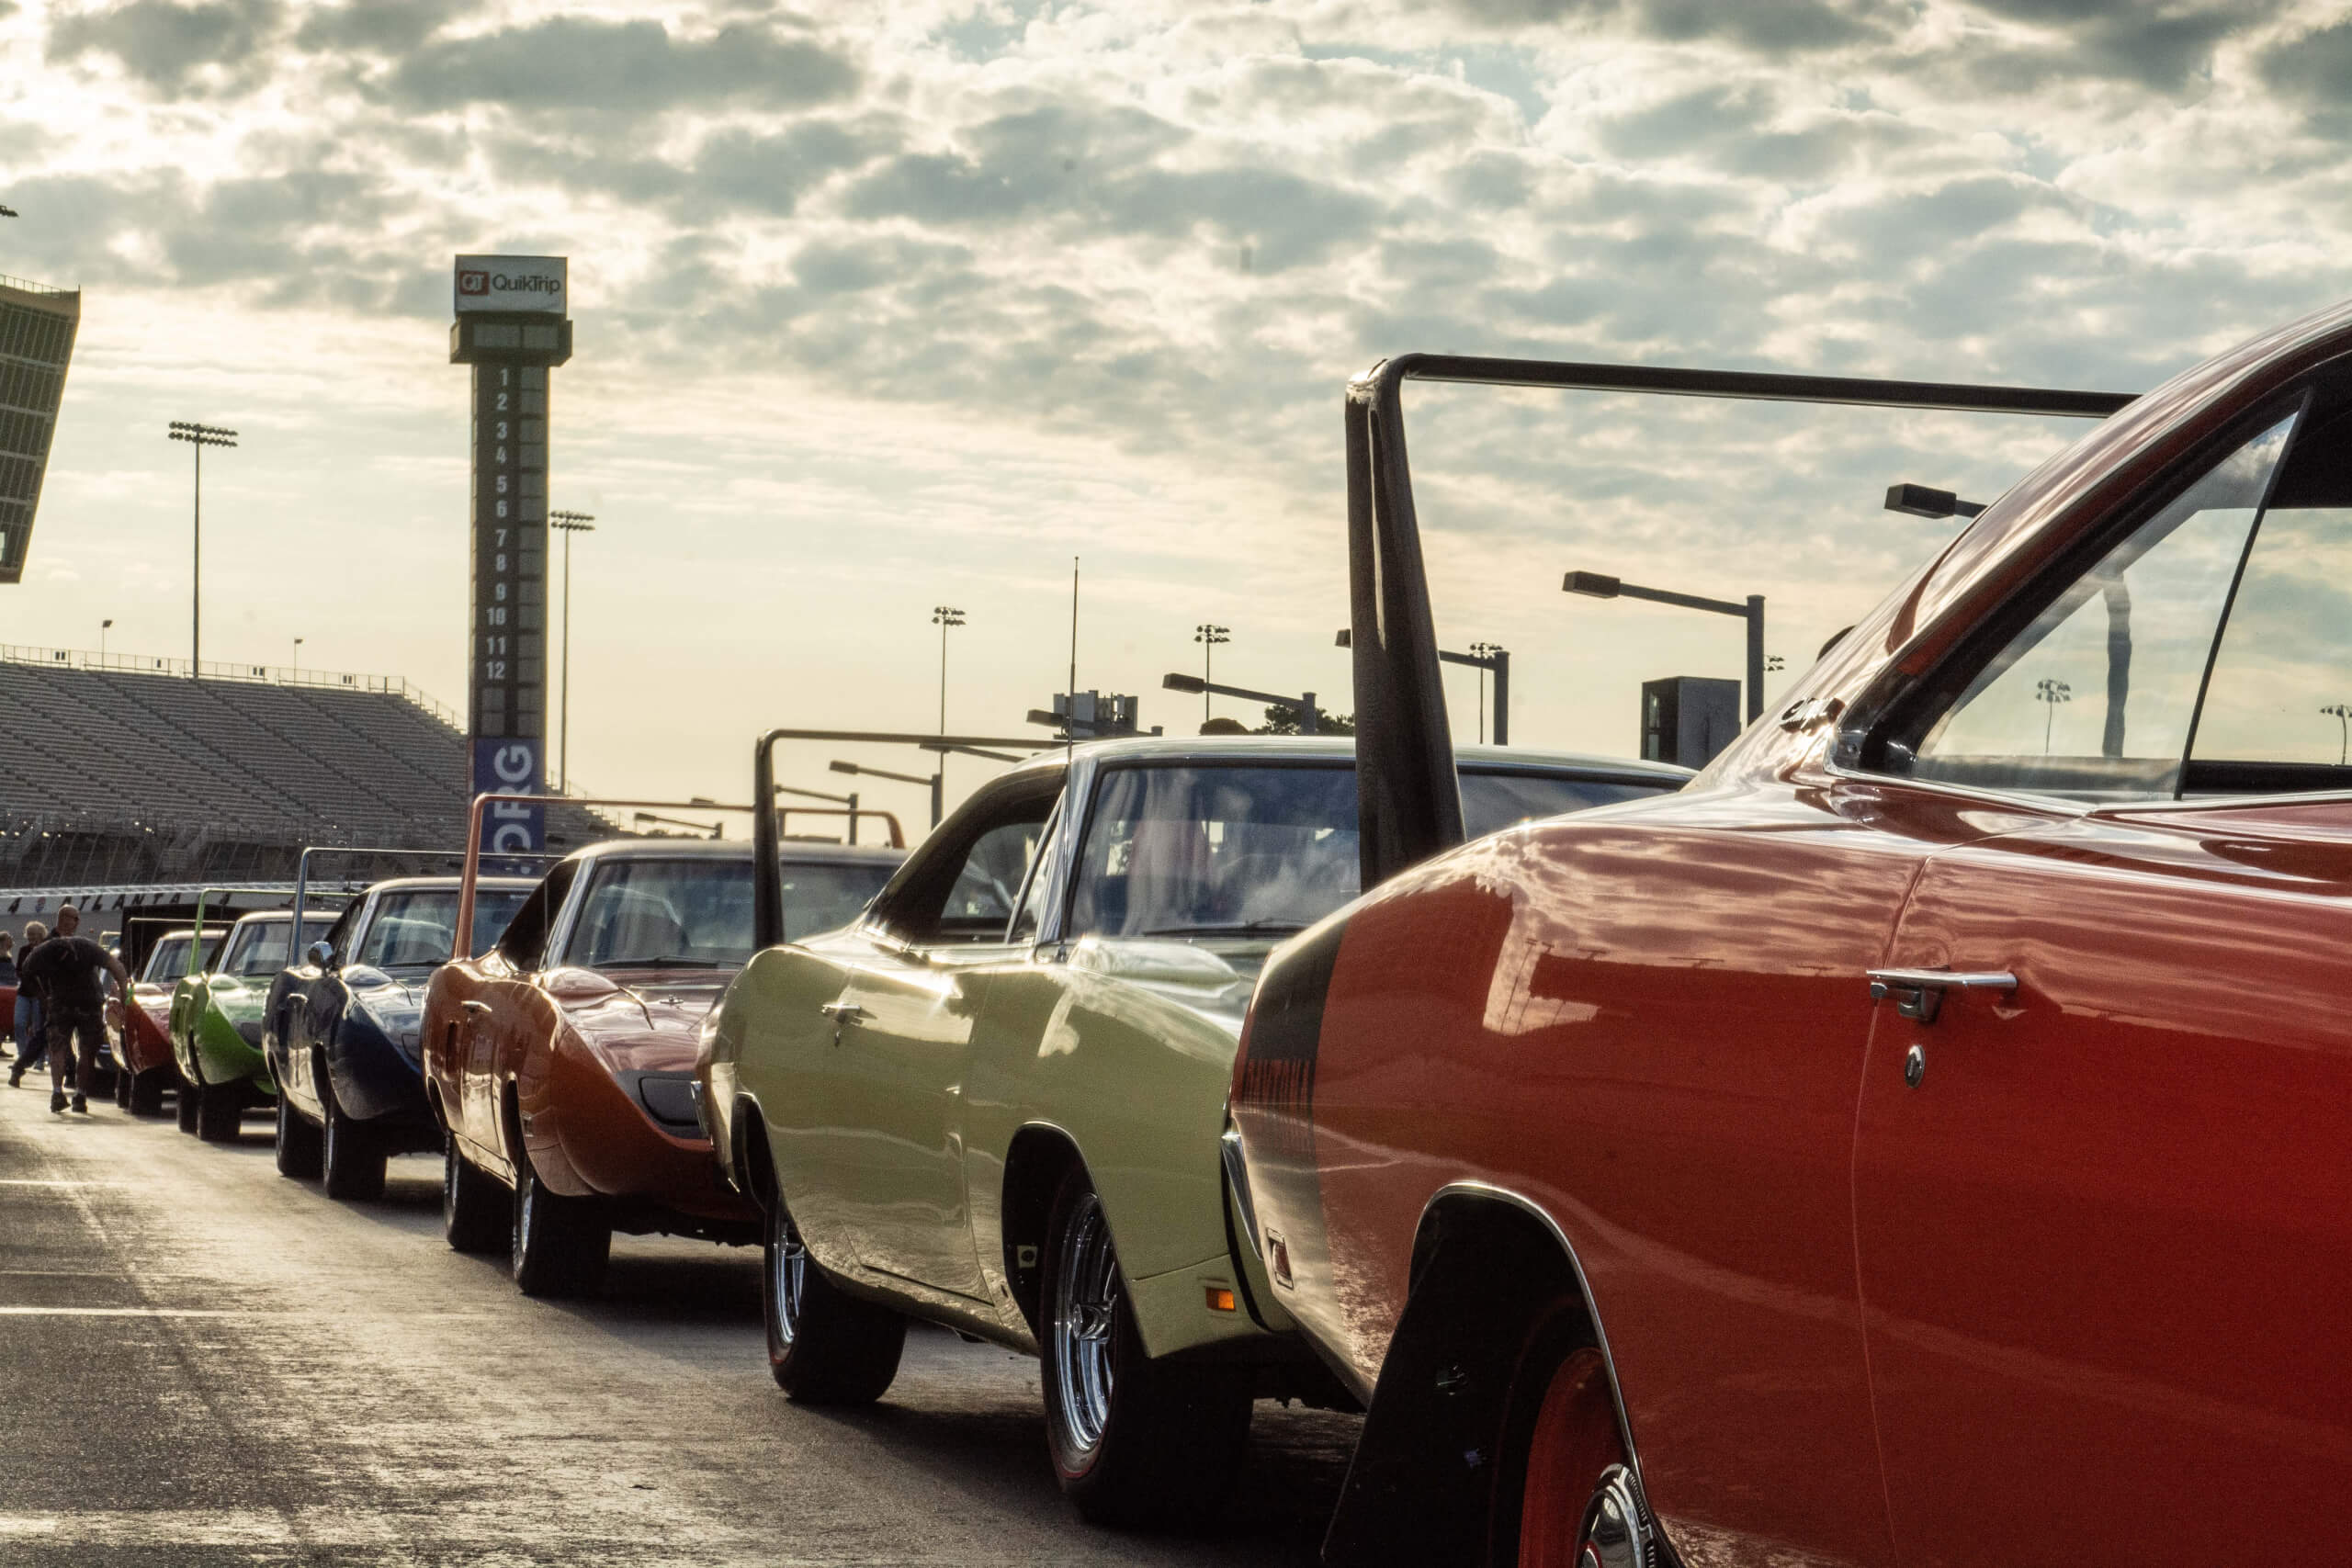 The 2019 Aero Warrior Reunion is celebrating the 50th Anniversary Celebration of the iconic wing and aero cars like the Plymouth Superbird and Dodge Daytona.